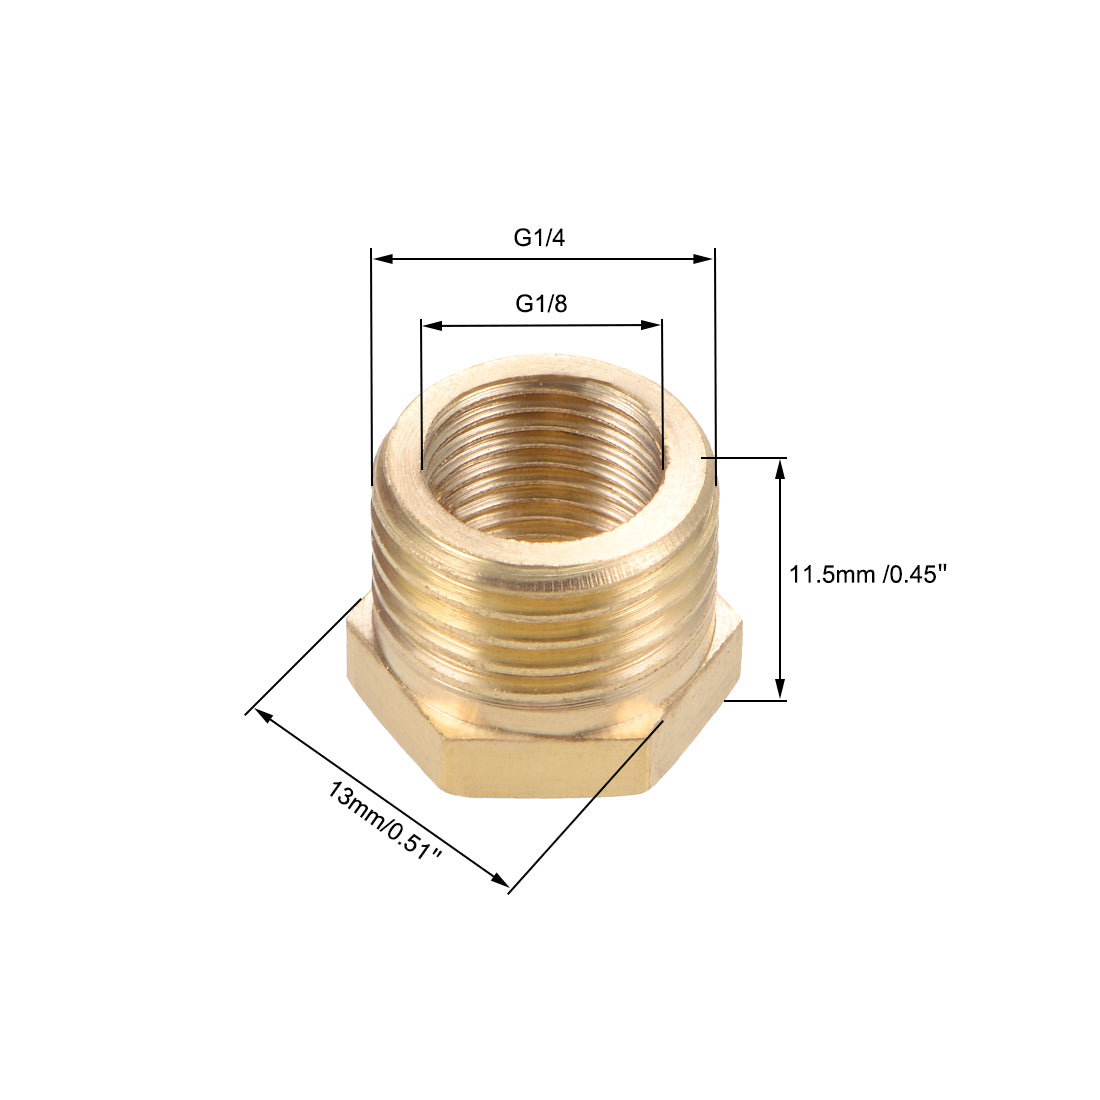 uxcell Uxcell Brass Threaded Pipe Fitting G1/4 Male x G1/8 Female Hex Bushing Adapter 10pcs